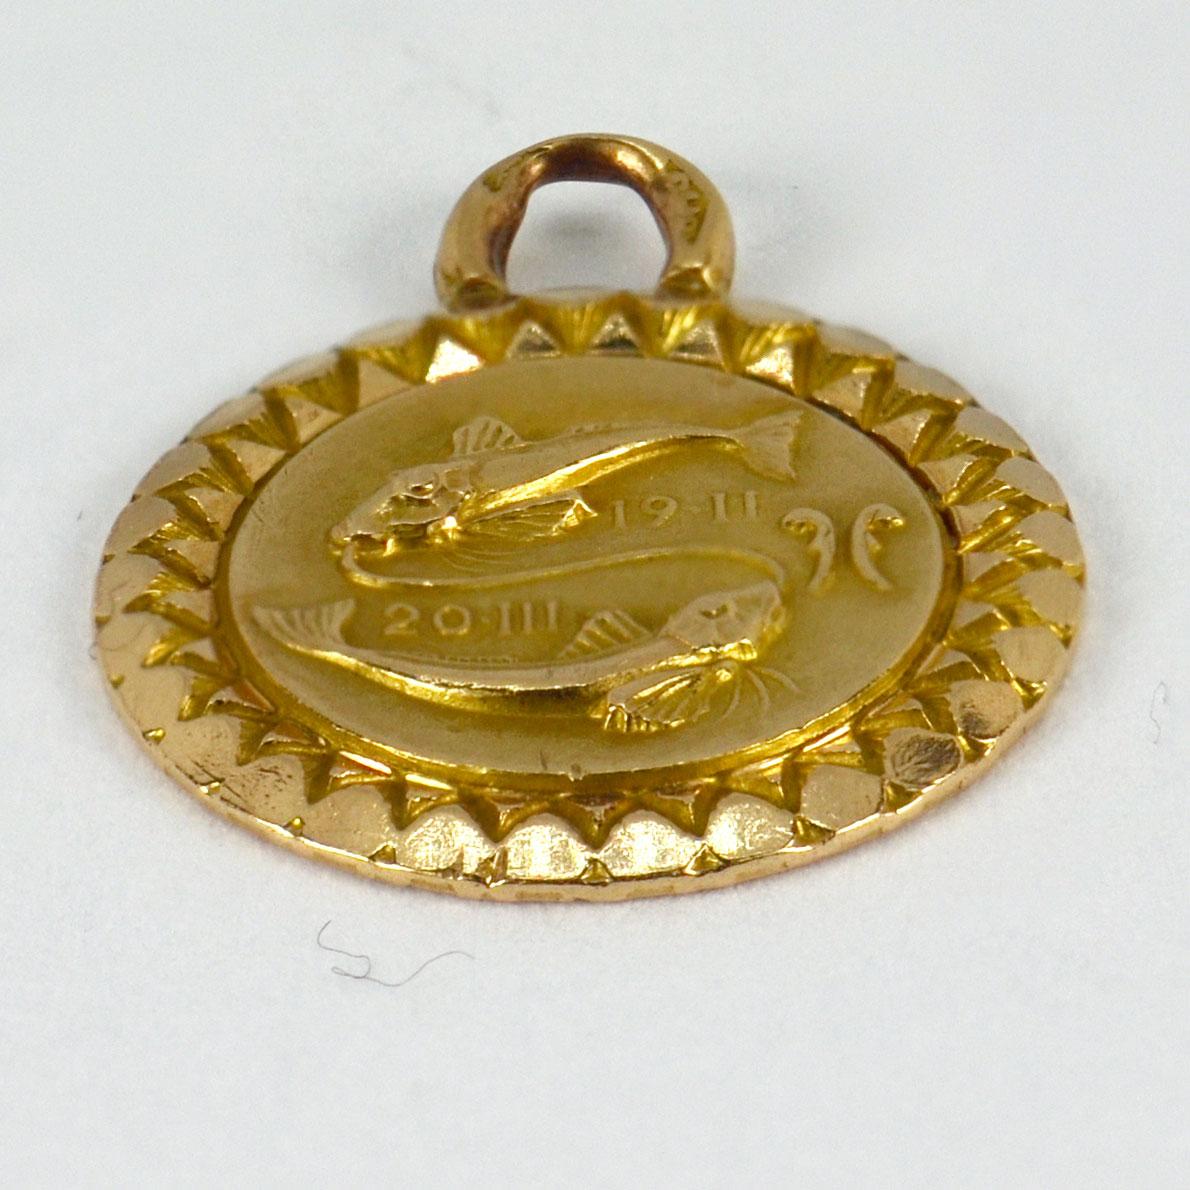 A French 18 karat (18K) yellow gold charm pendant depicting the double fish of the zodiac sign Pisces, with the dates 19-February - 20-March. Engraved to the reverse ‘Martine 19.3.51’. Stamped with the eagle’s head for French manufacture and 18